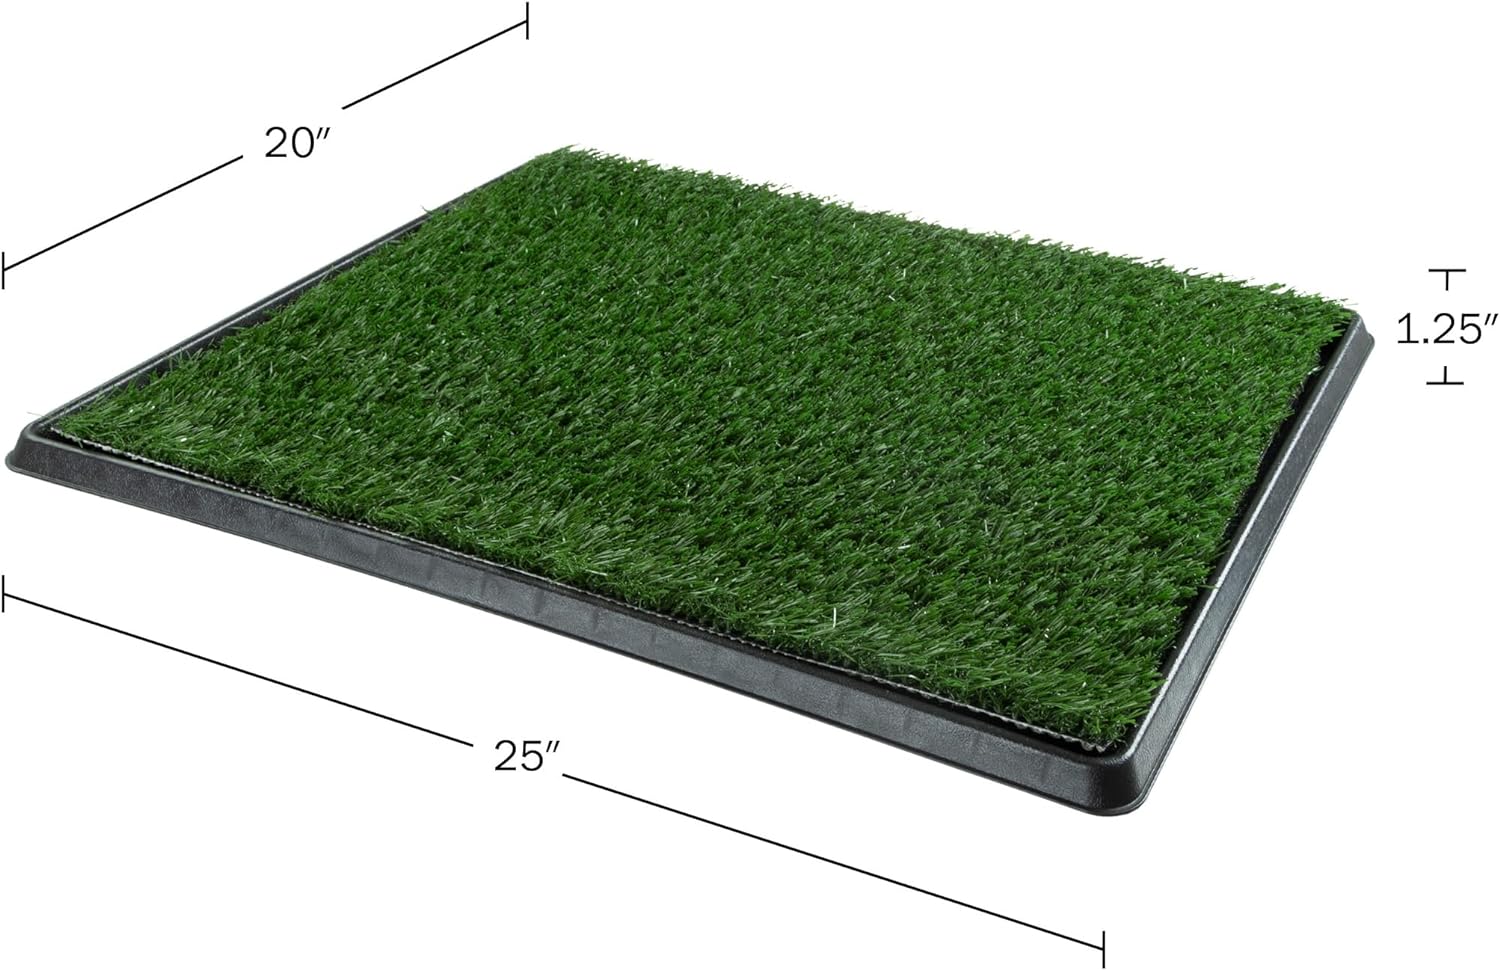 Wholesale prices with free shipping all over United States Artificial Grass Puppy Pee Pad for Dogs and Small Pets - 20x30 Reusable 3-Layer Training Potty Pad with Tray - Dog Housebreaking Supplies by PETMAKER - Steven Deals